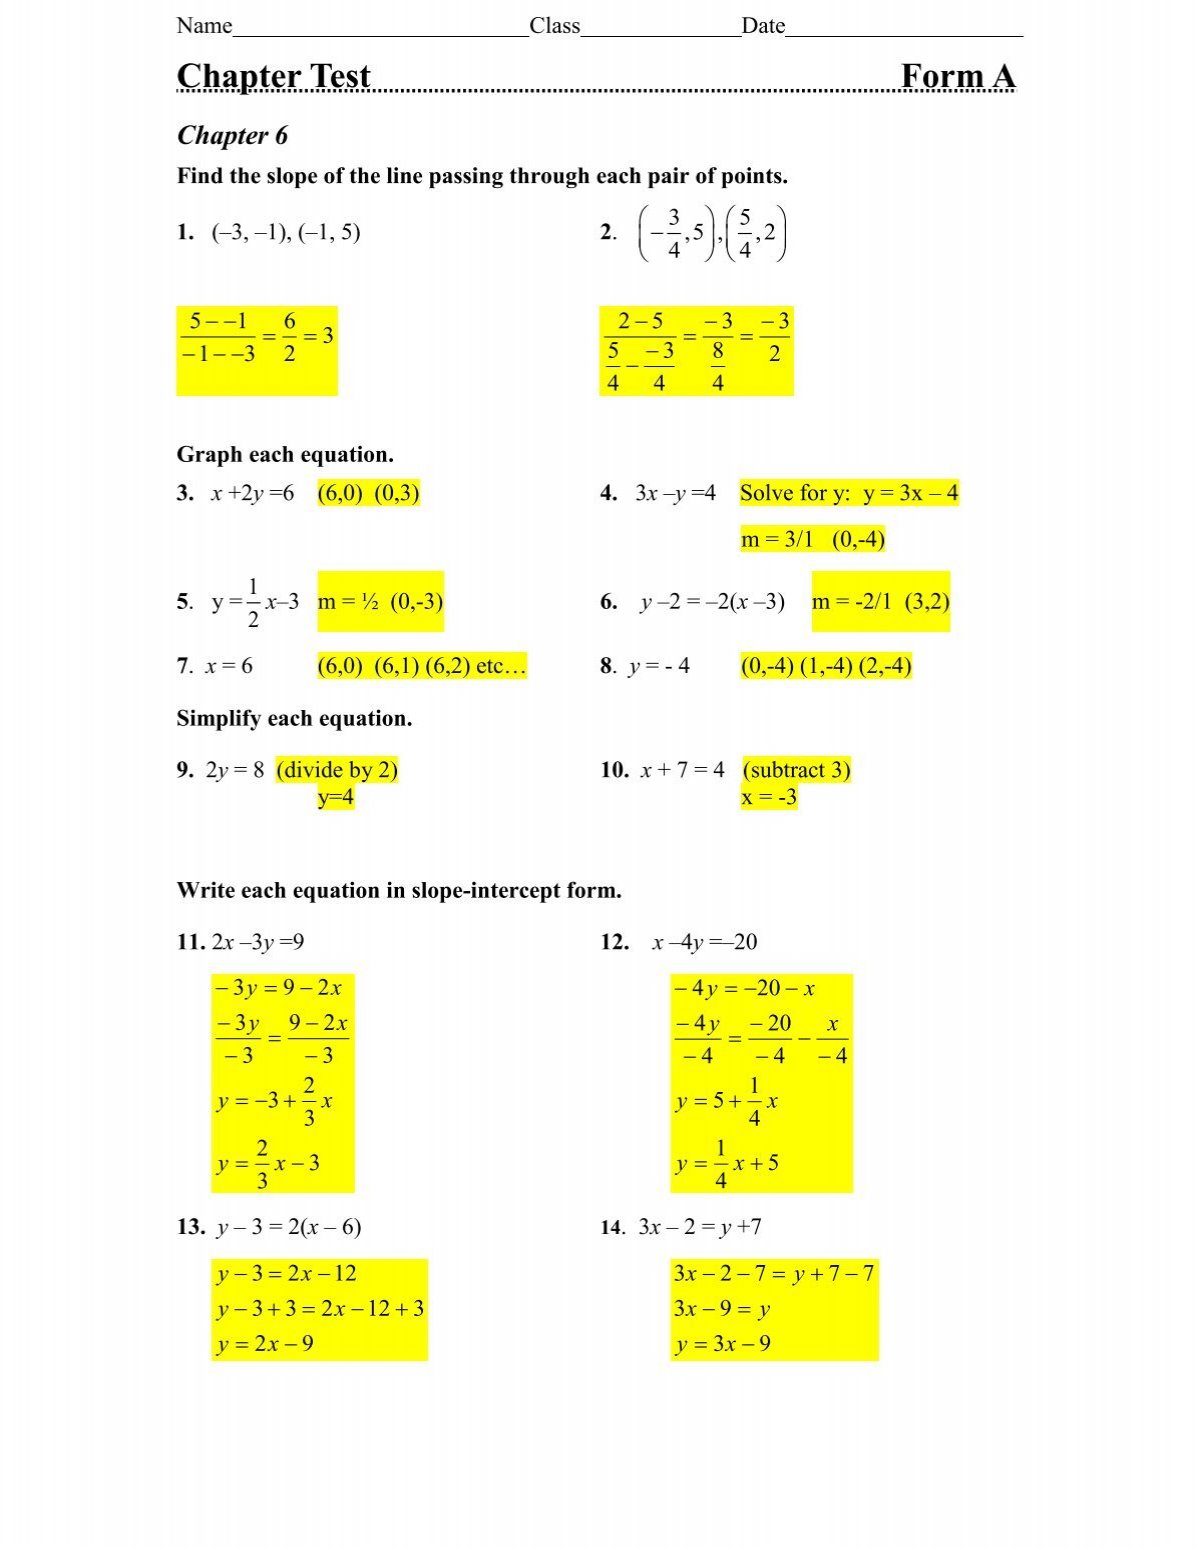 chapter-6-test-with-solutions